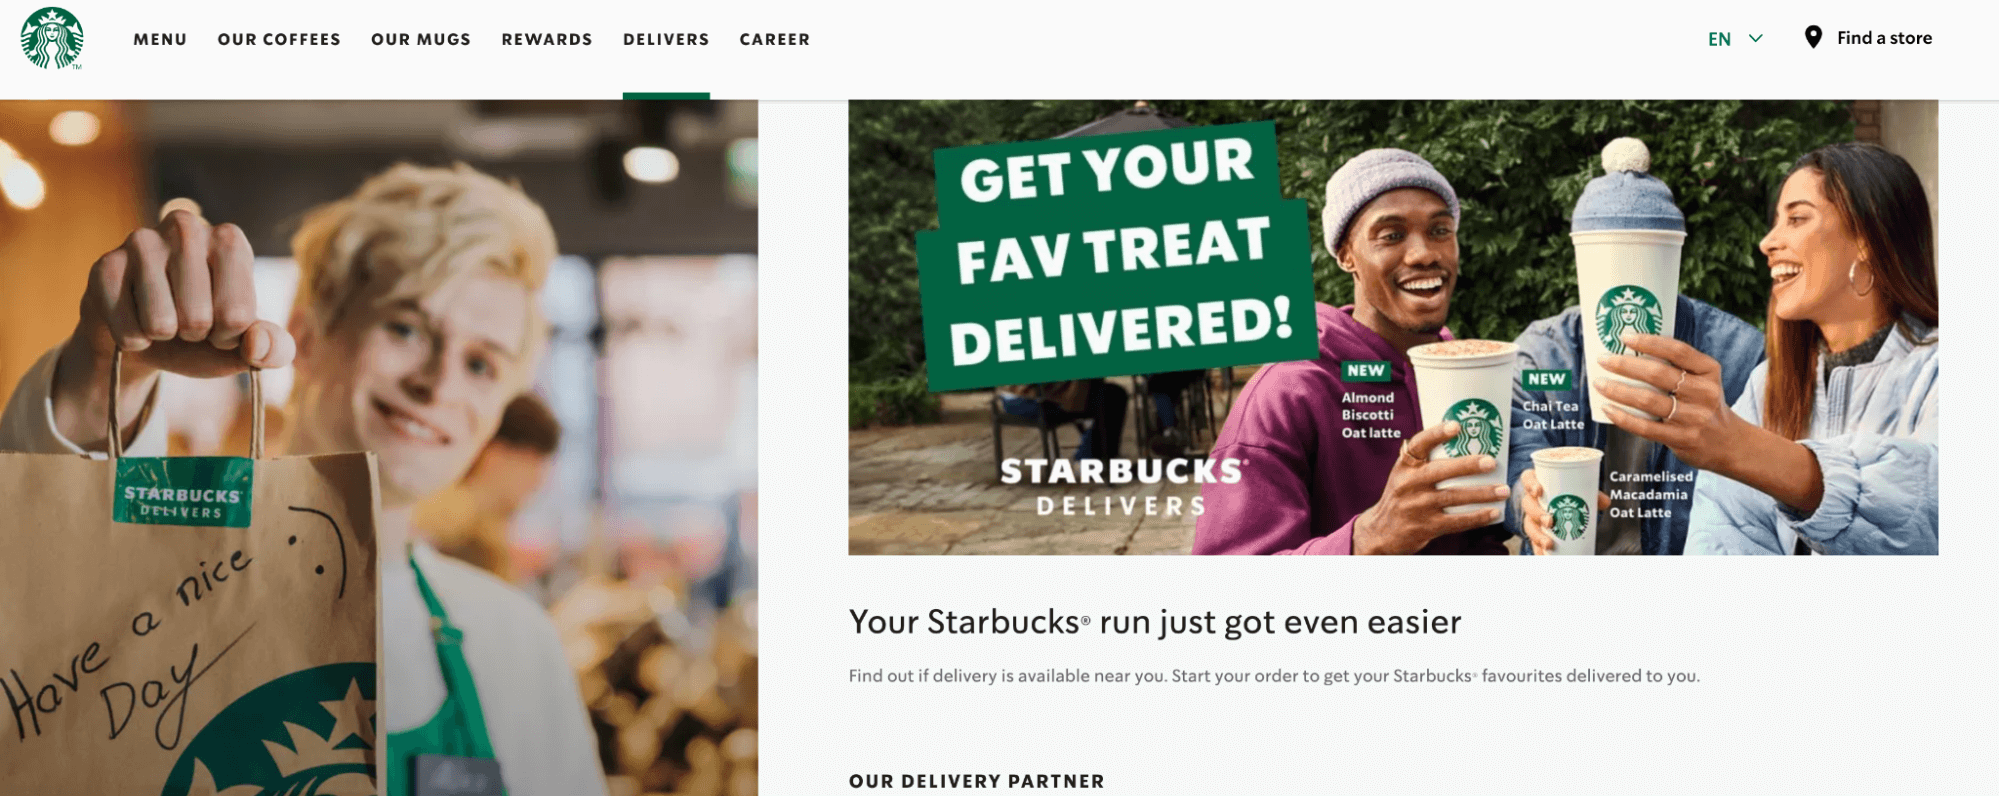 Starbucks&rsquo; delivery options